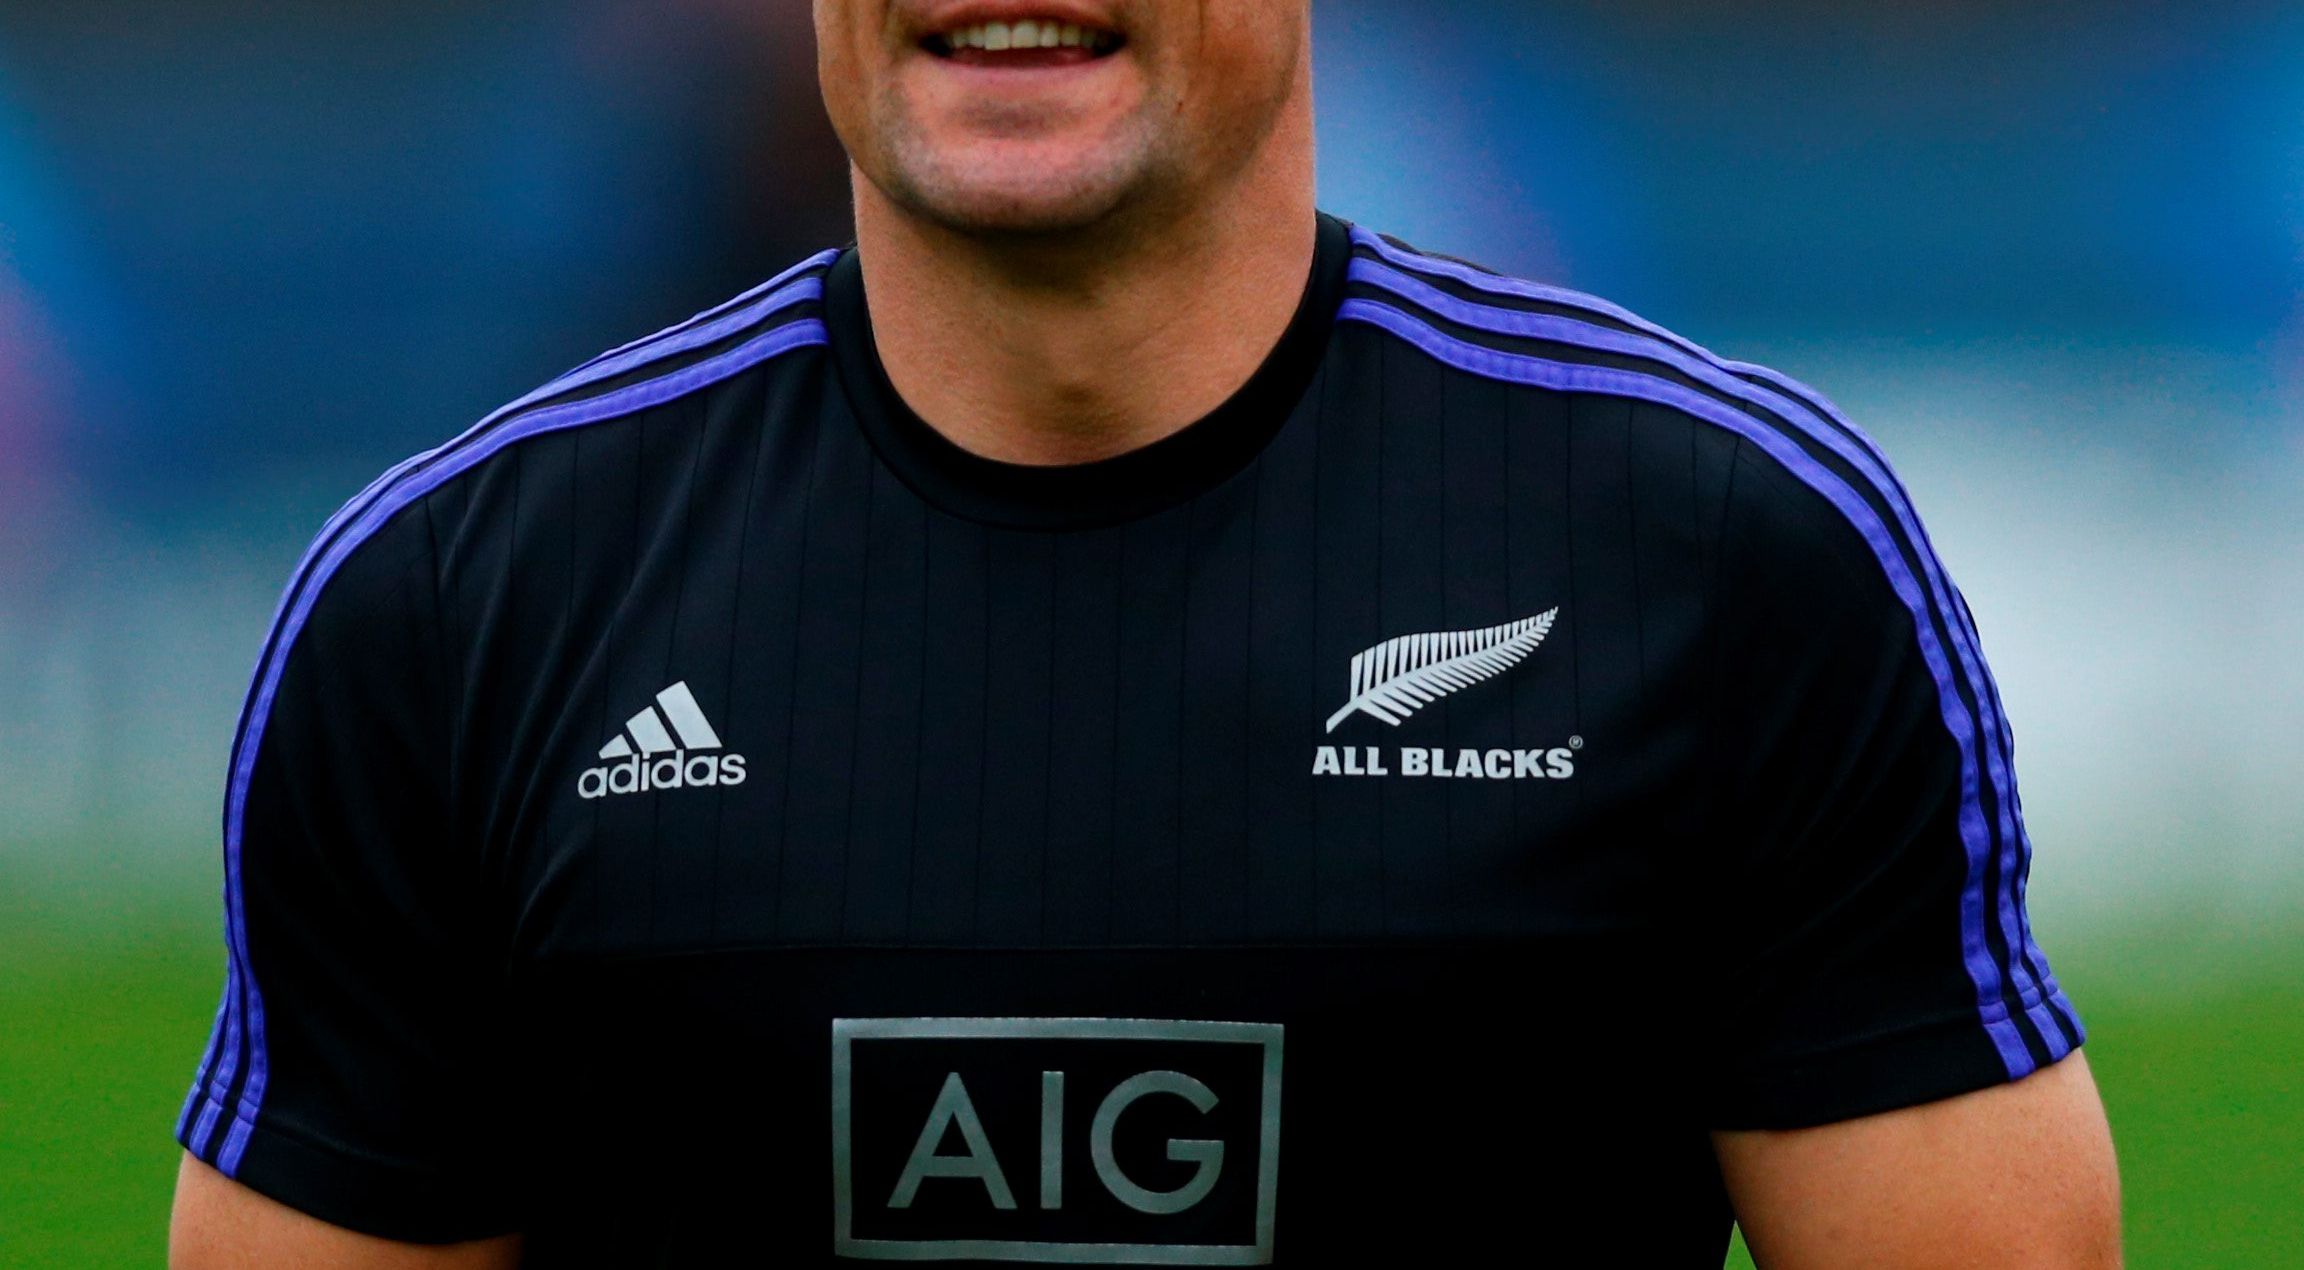 New Zealand vs France RWC 2015: Dan Carter rises to the occasion